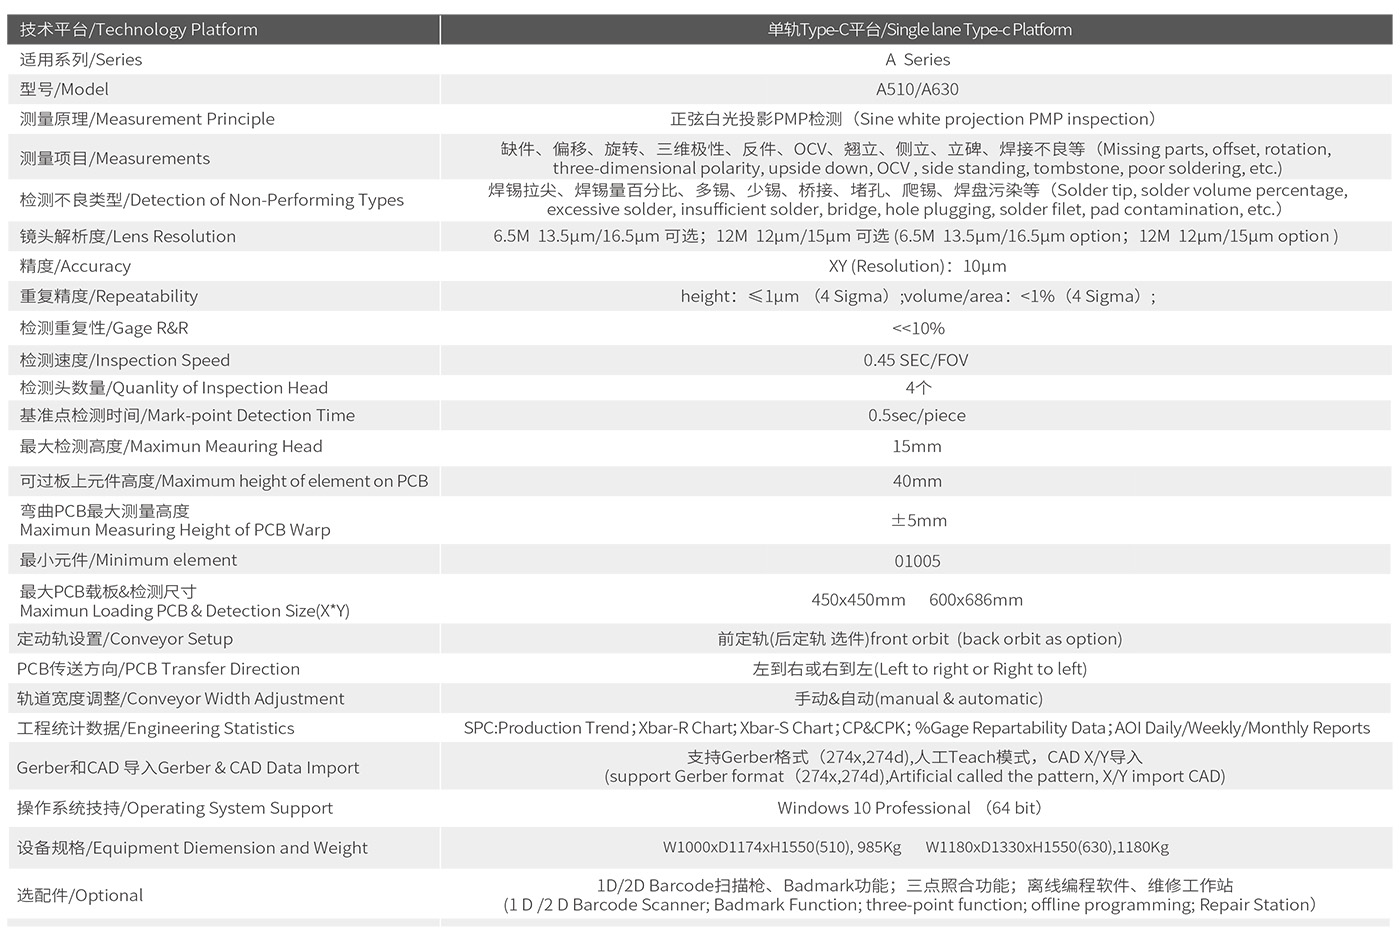 A-630 Technical Specifications